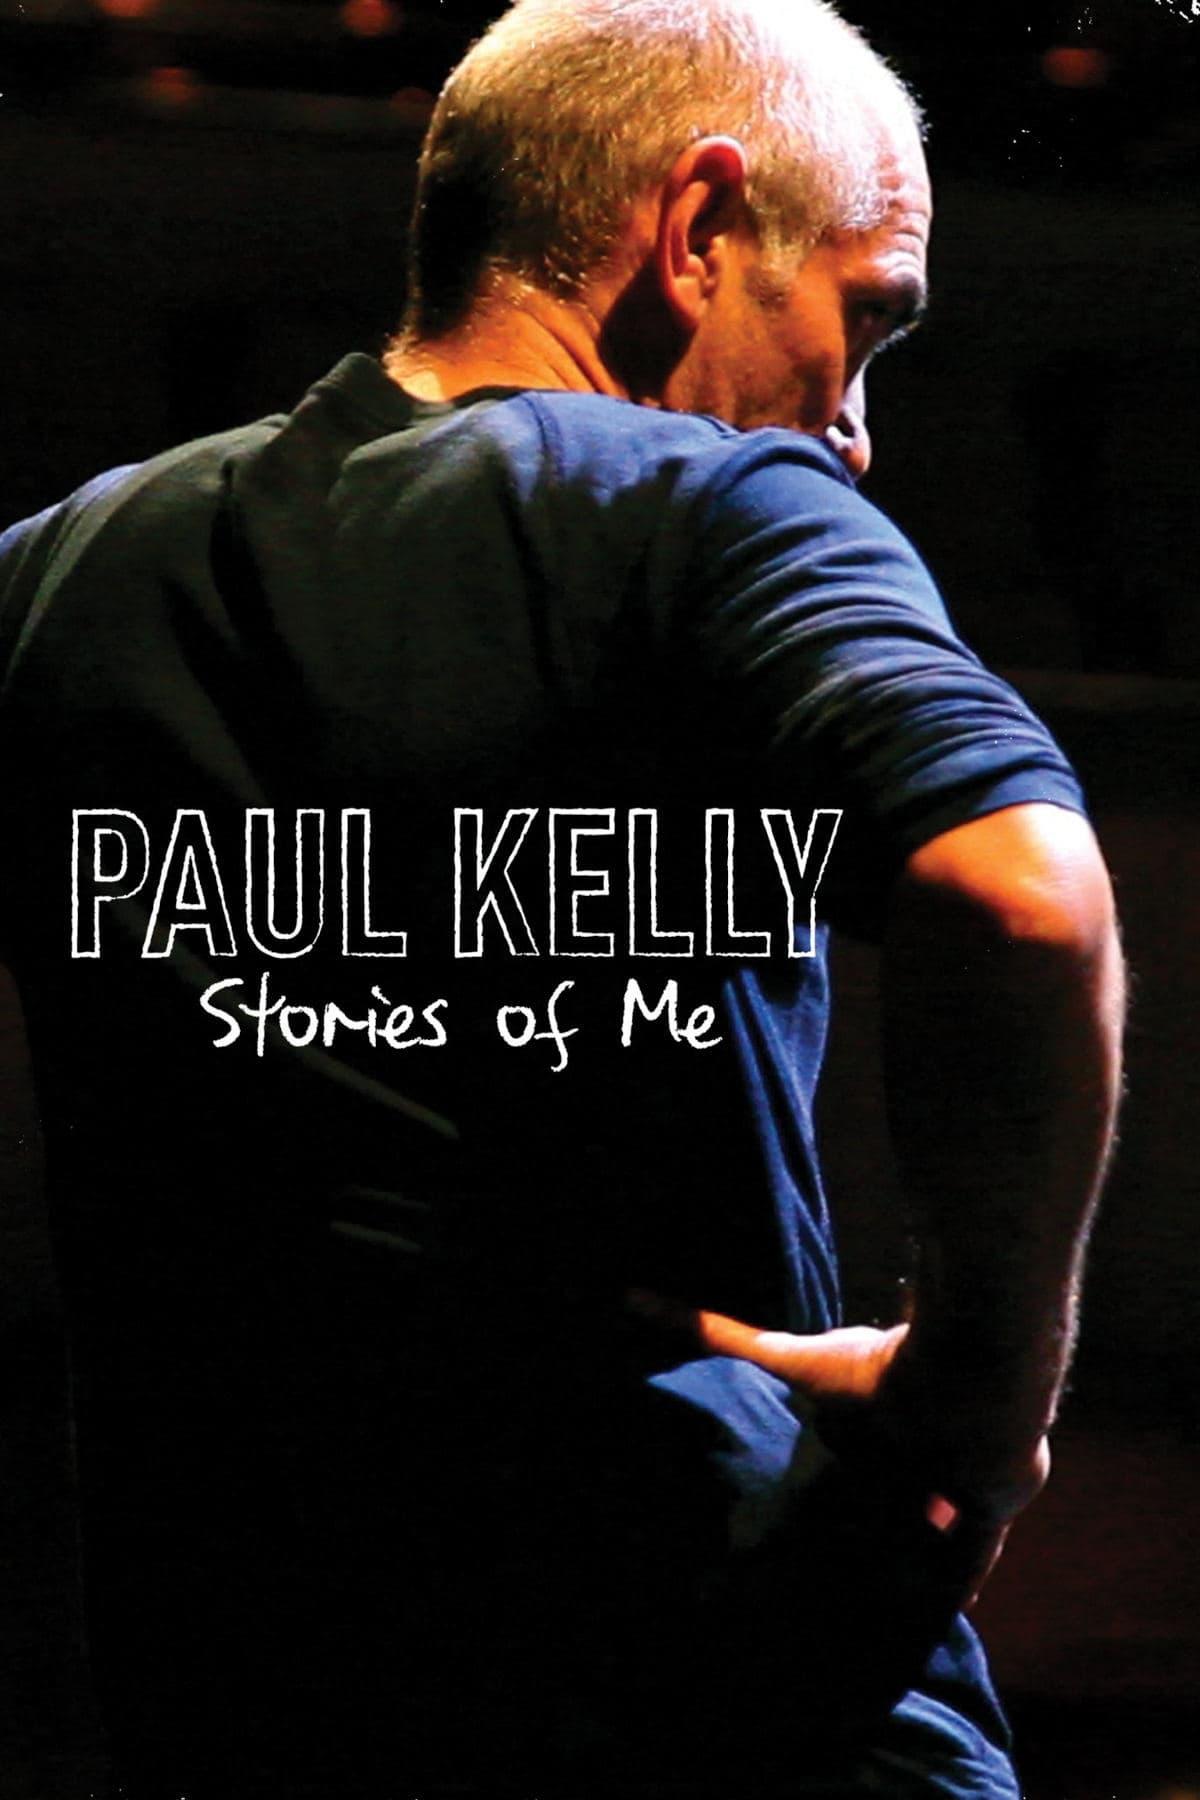 Paul Kelly: Stories of Me poster